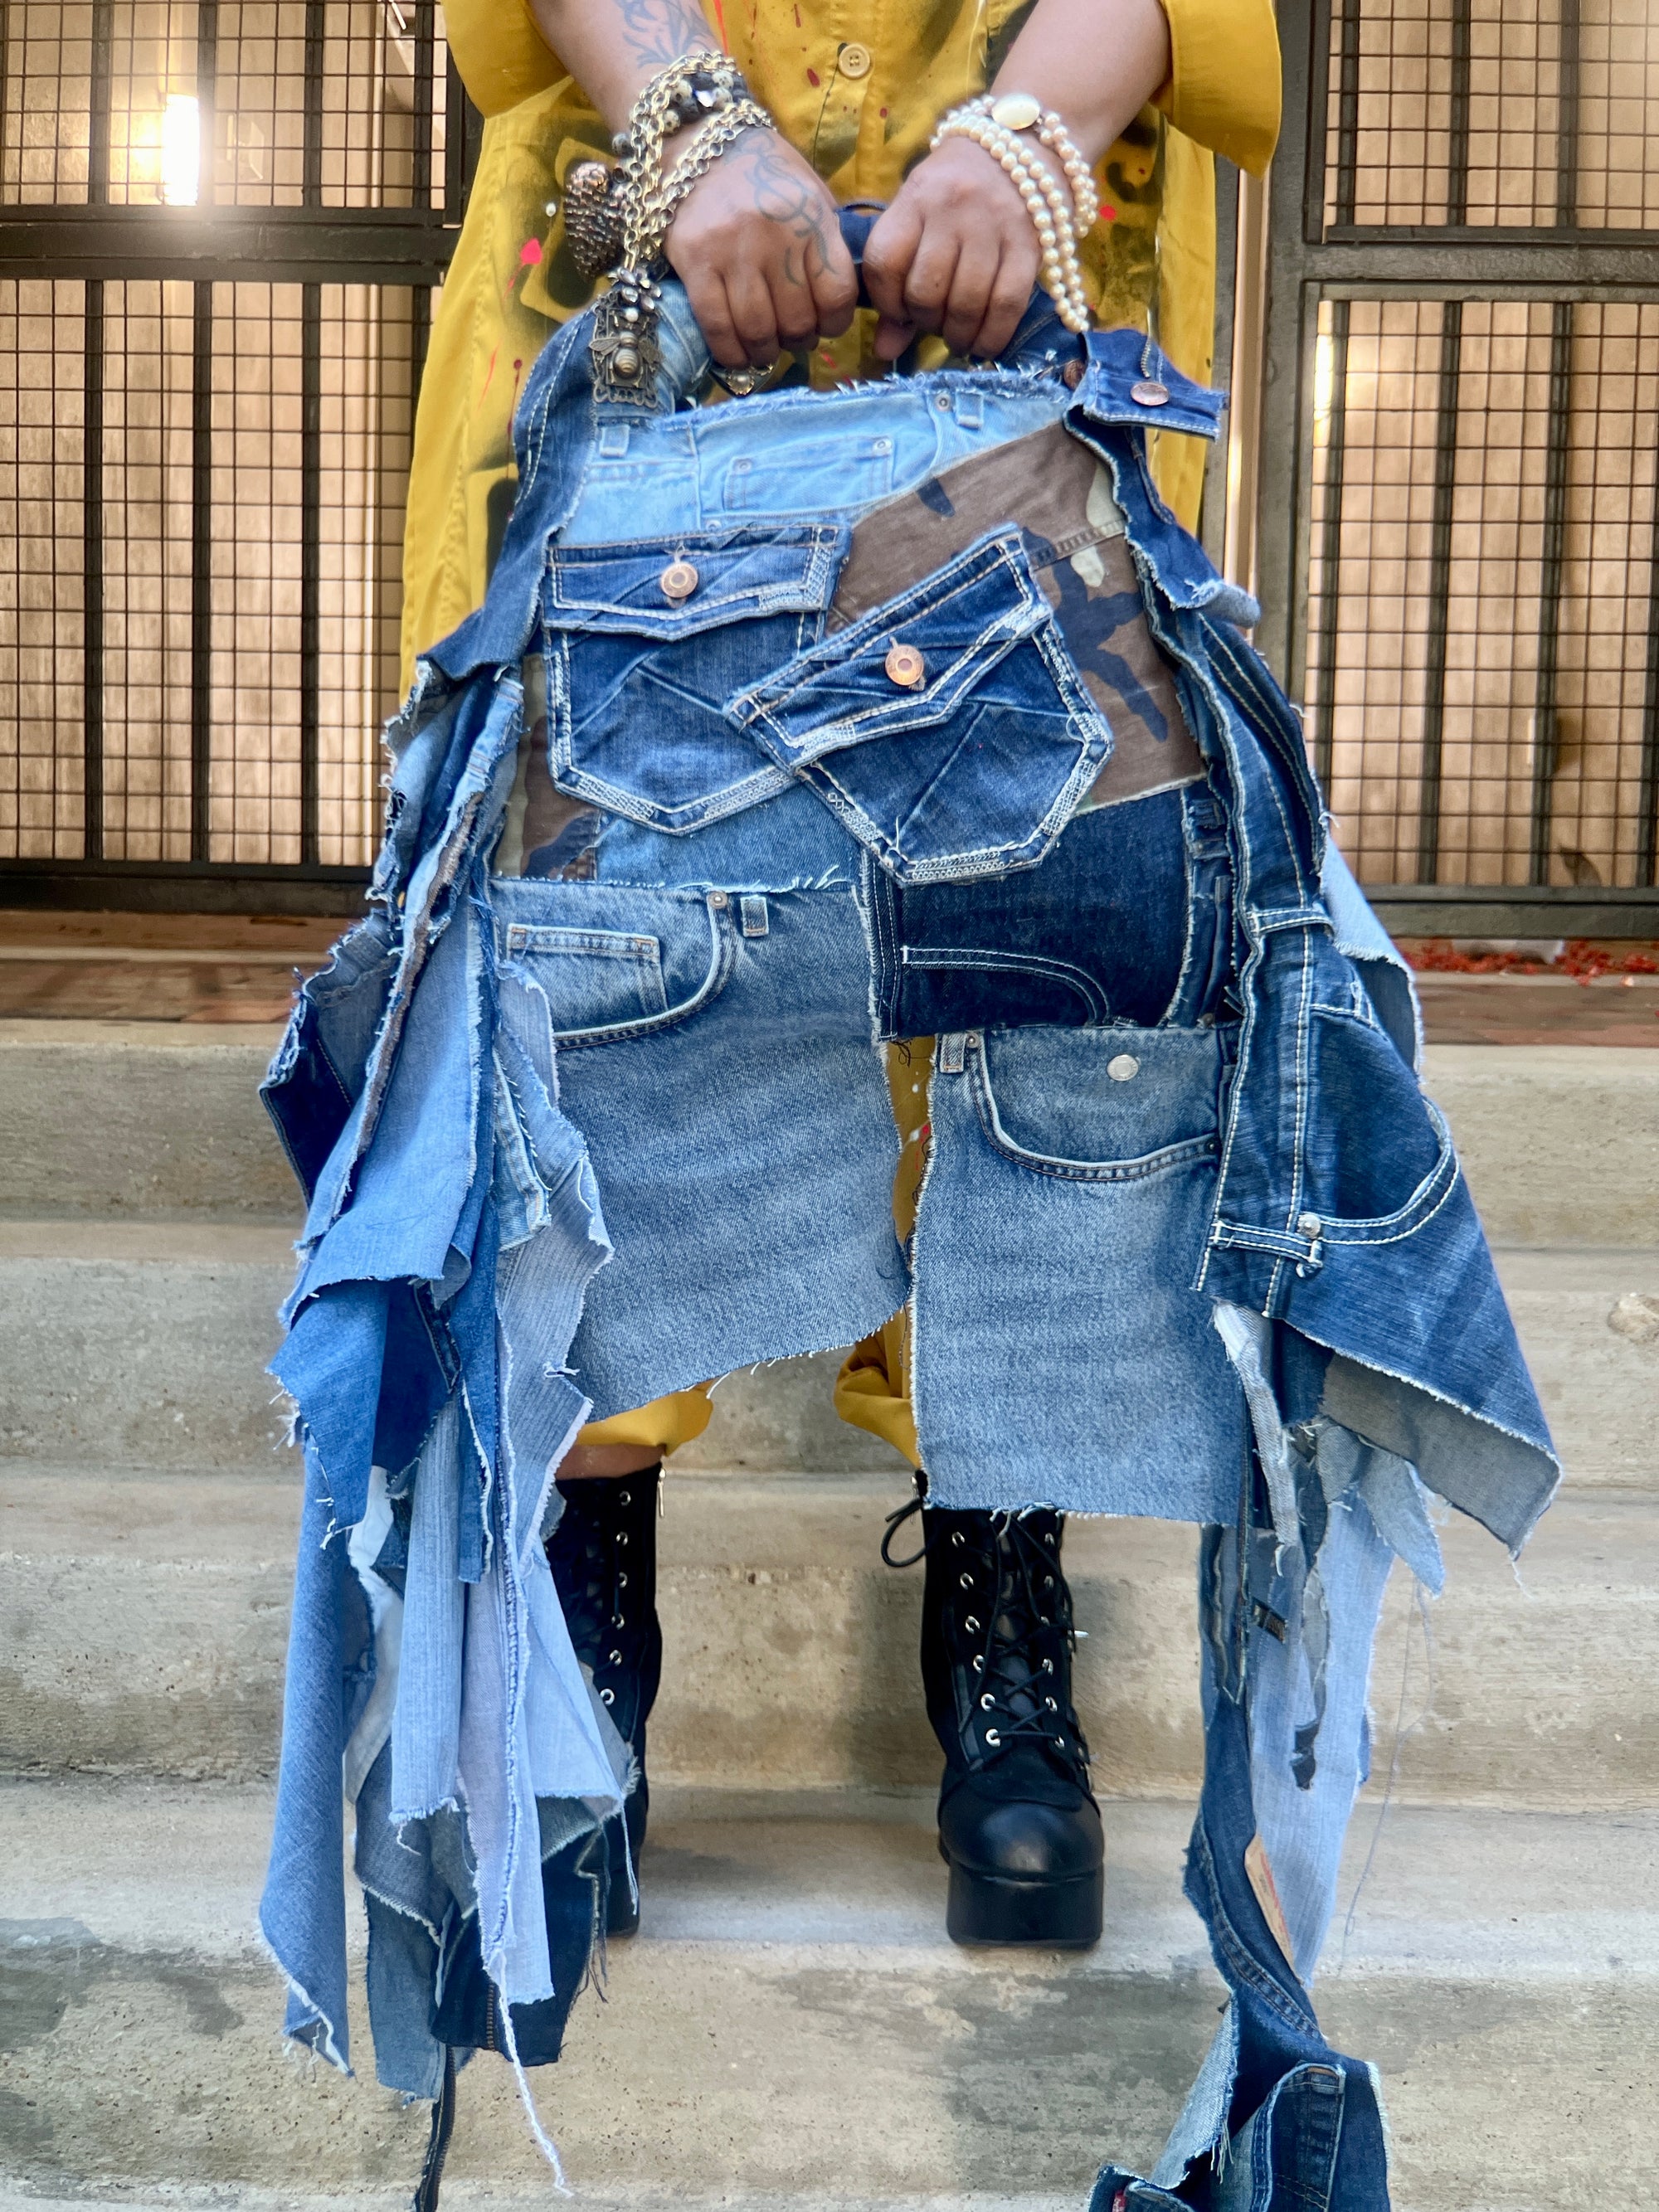 The New Janky Denim On Denim Ugly Jean Bag Has Hit The Shop!